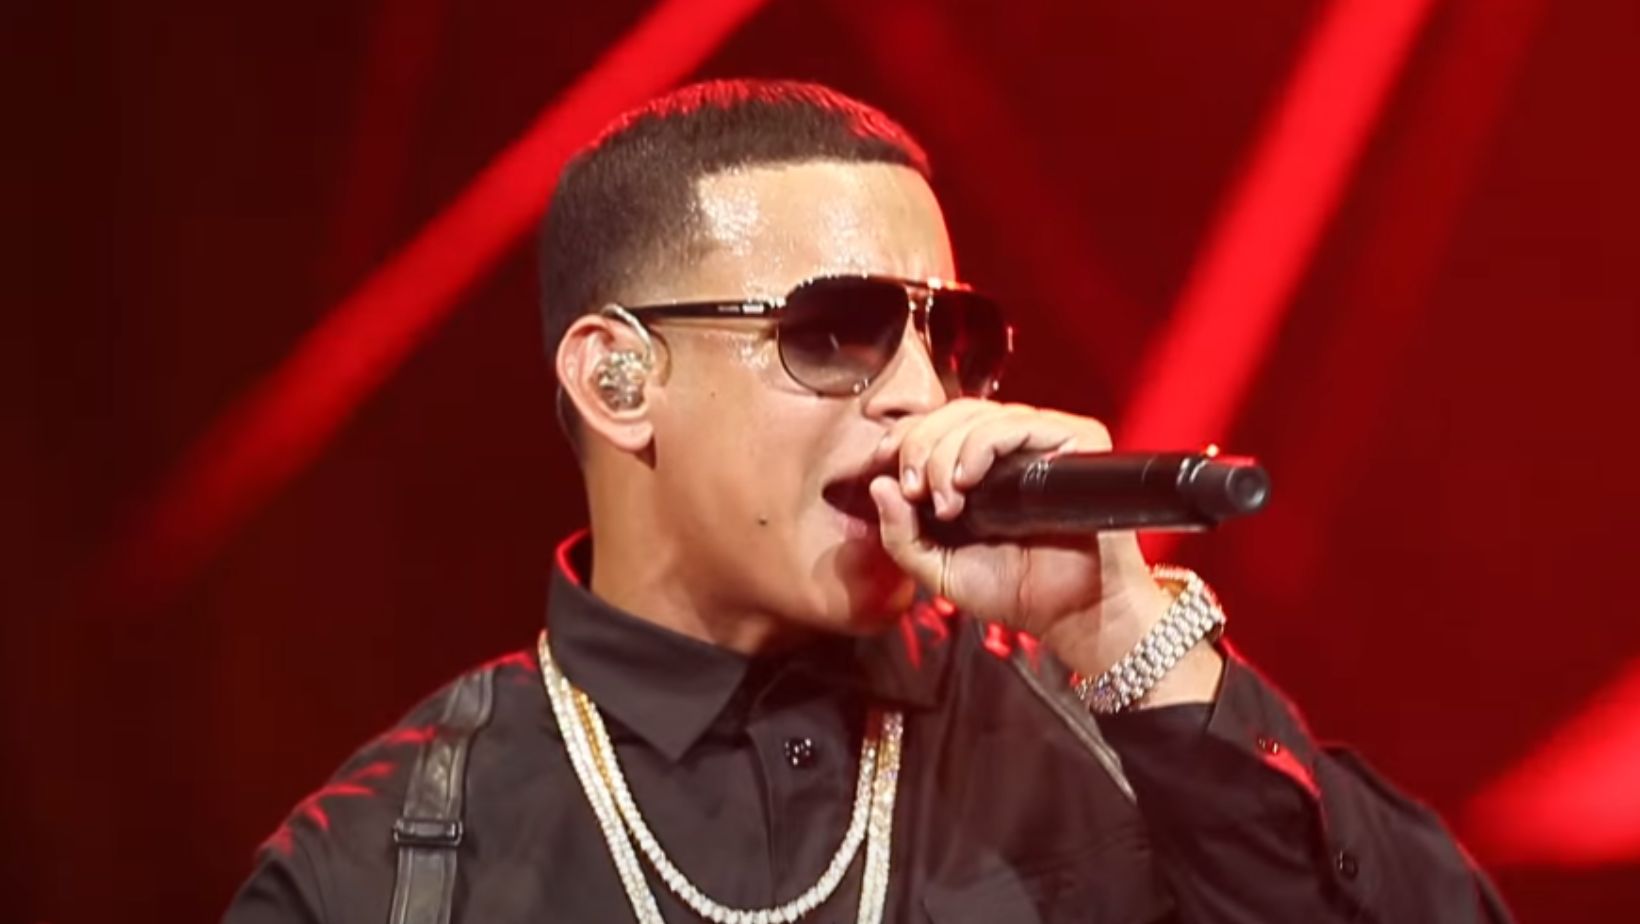 Daddy Yankees Gasolina Becomes the First-Ever Reggaeton Song to Be Added to the